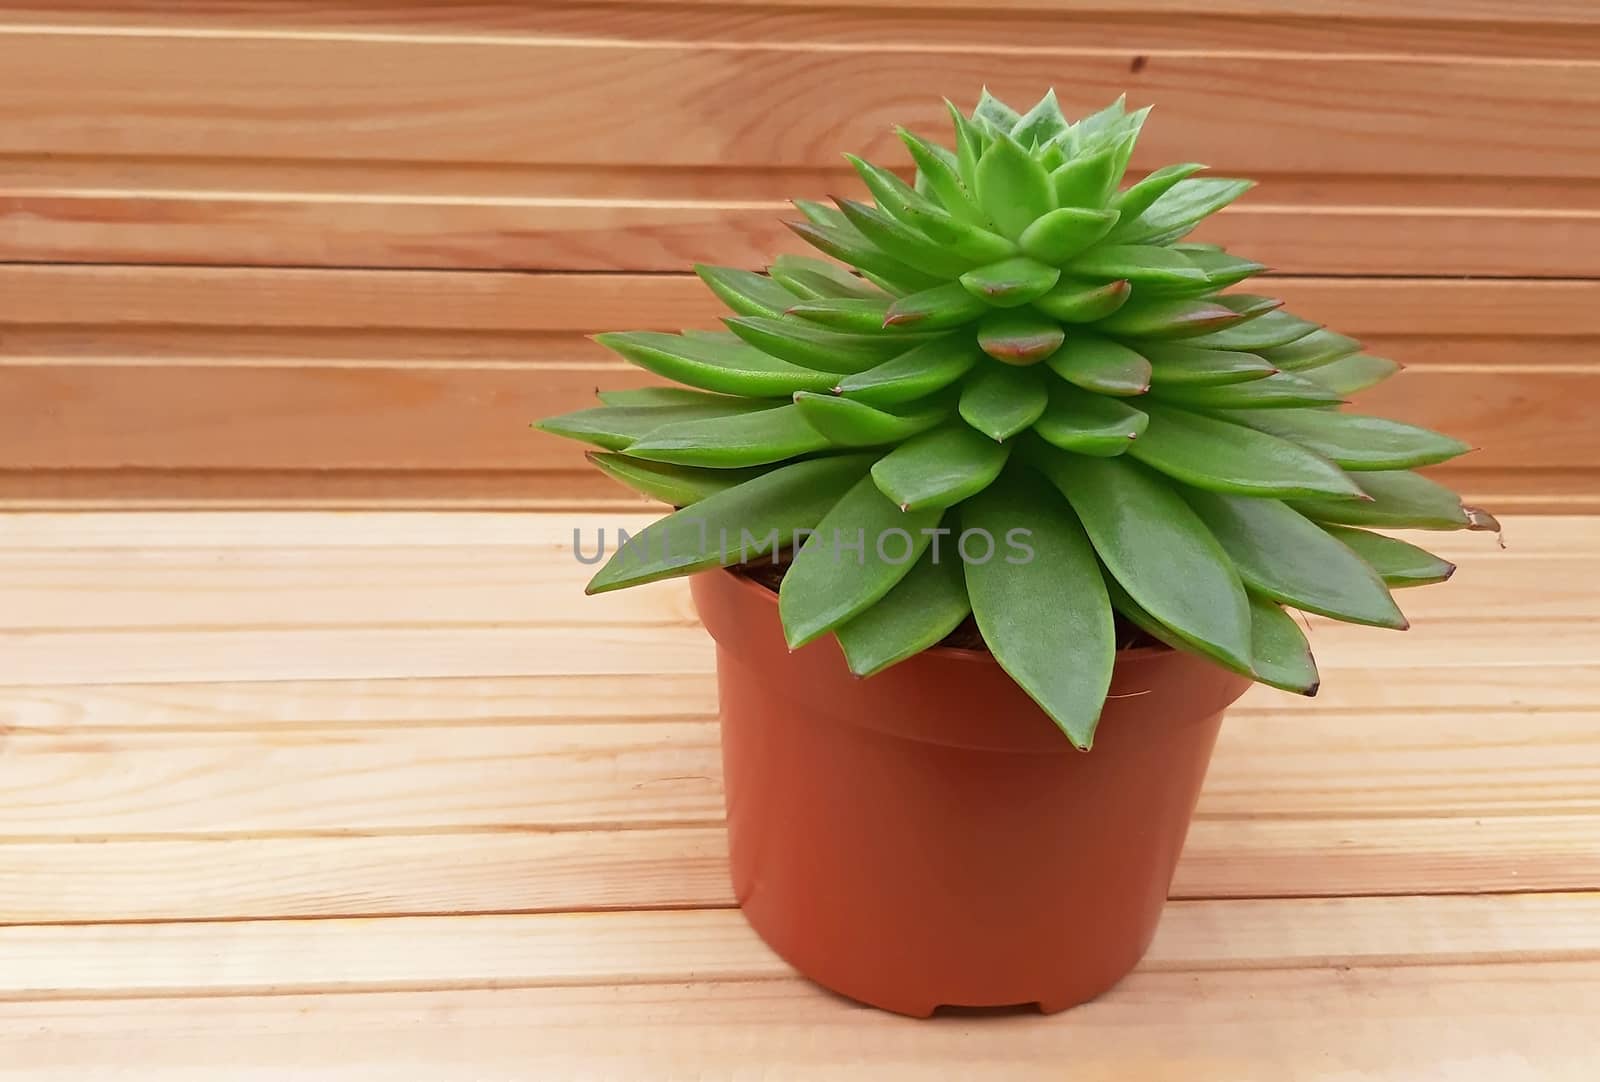 Echeveria on wooden background with copy space.